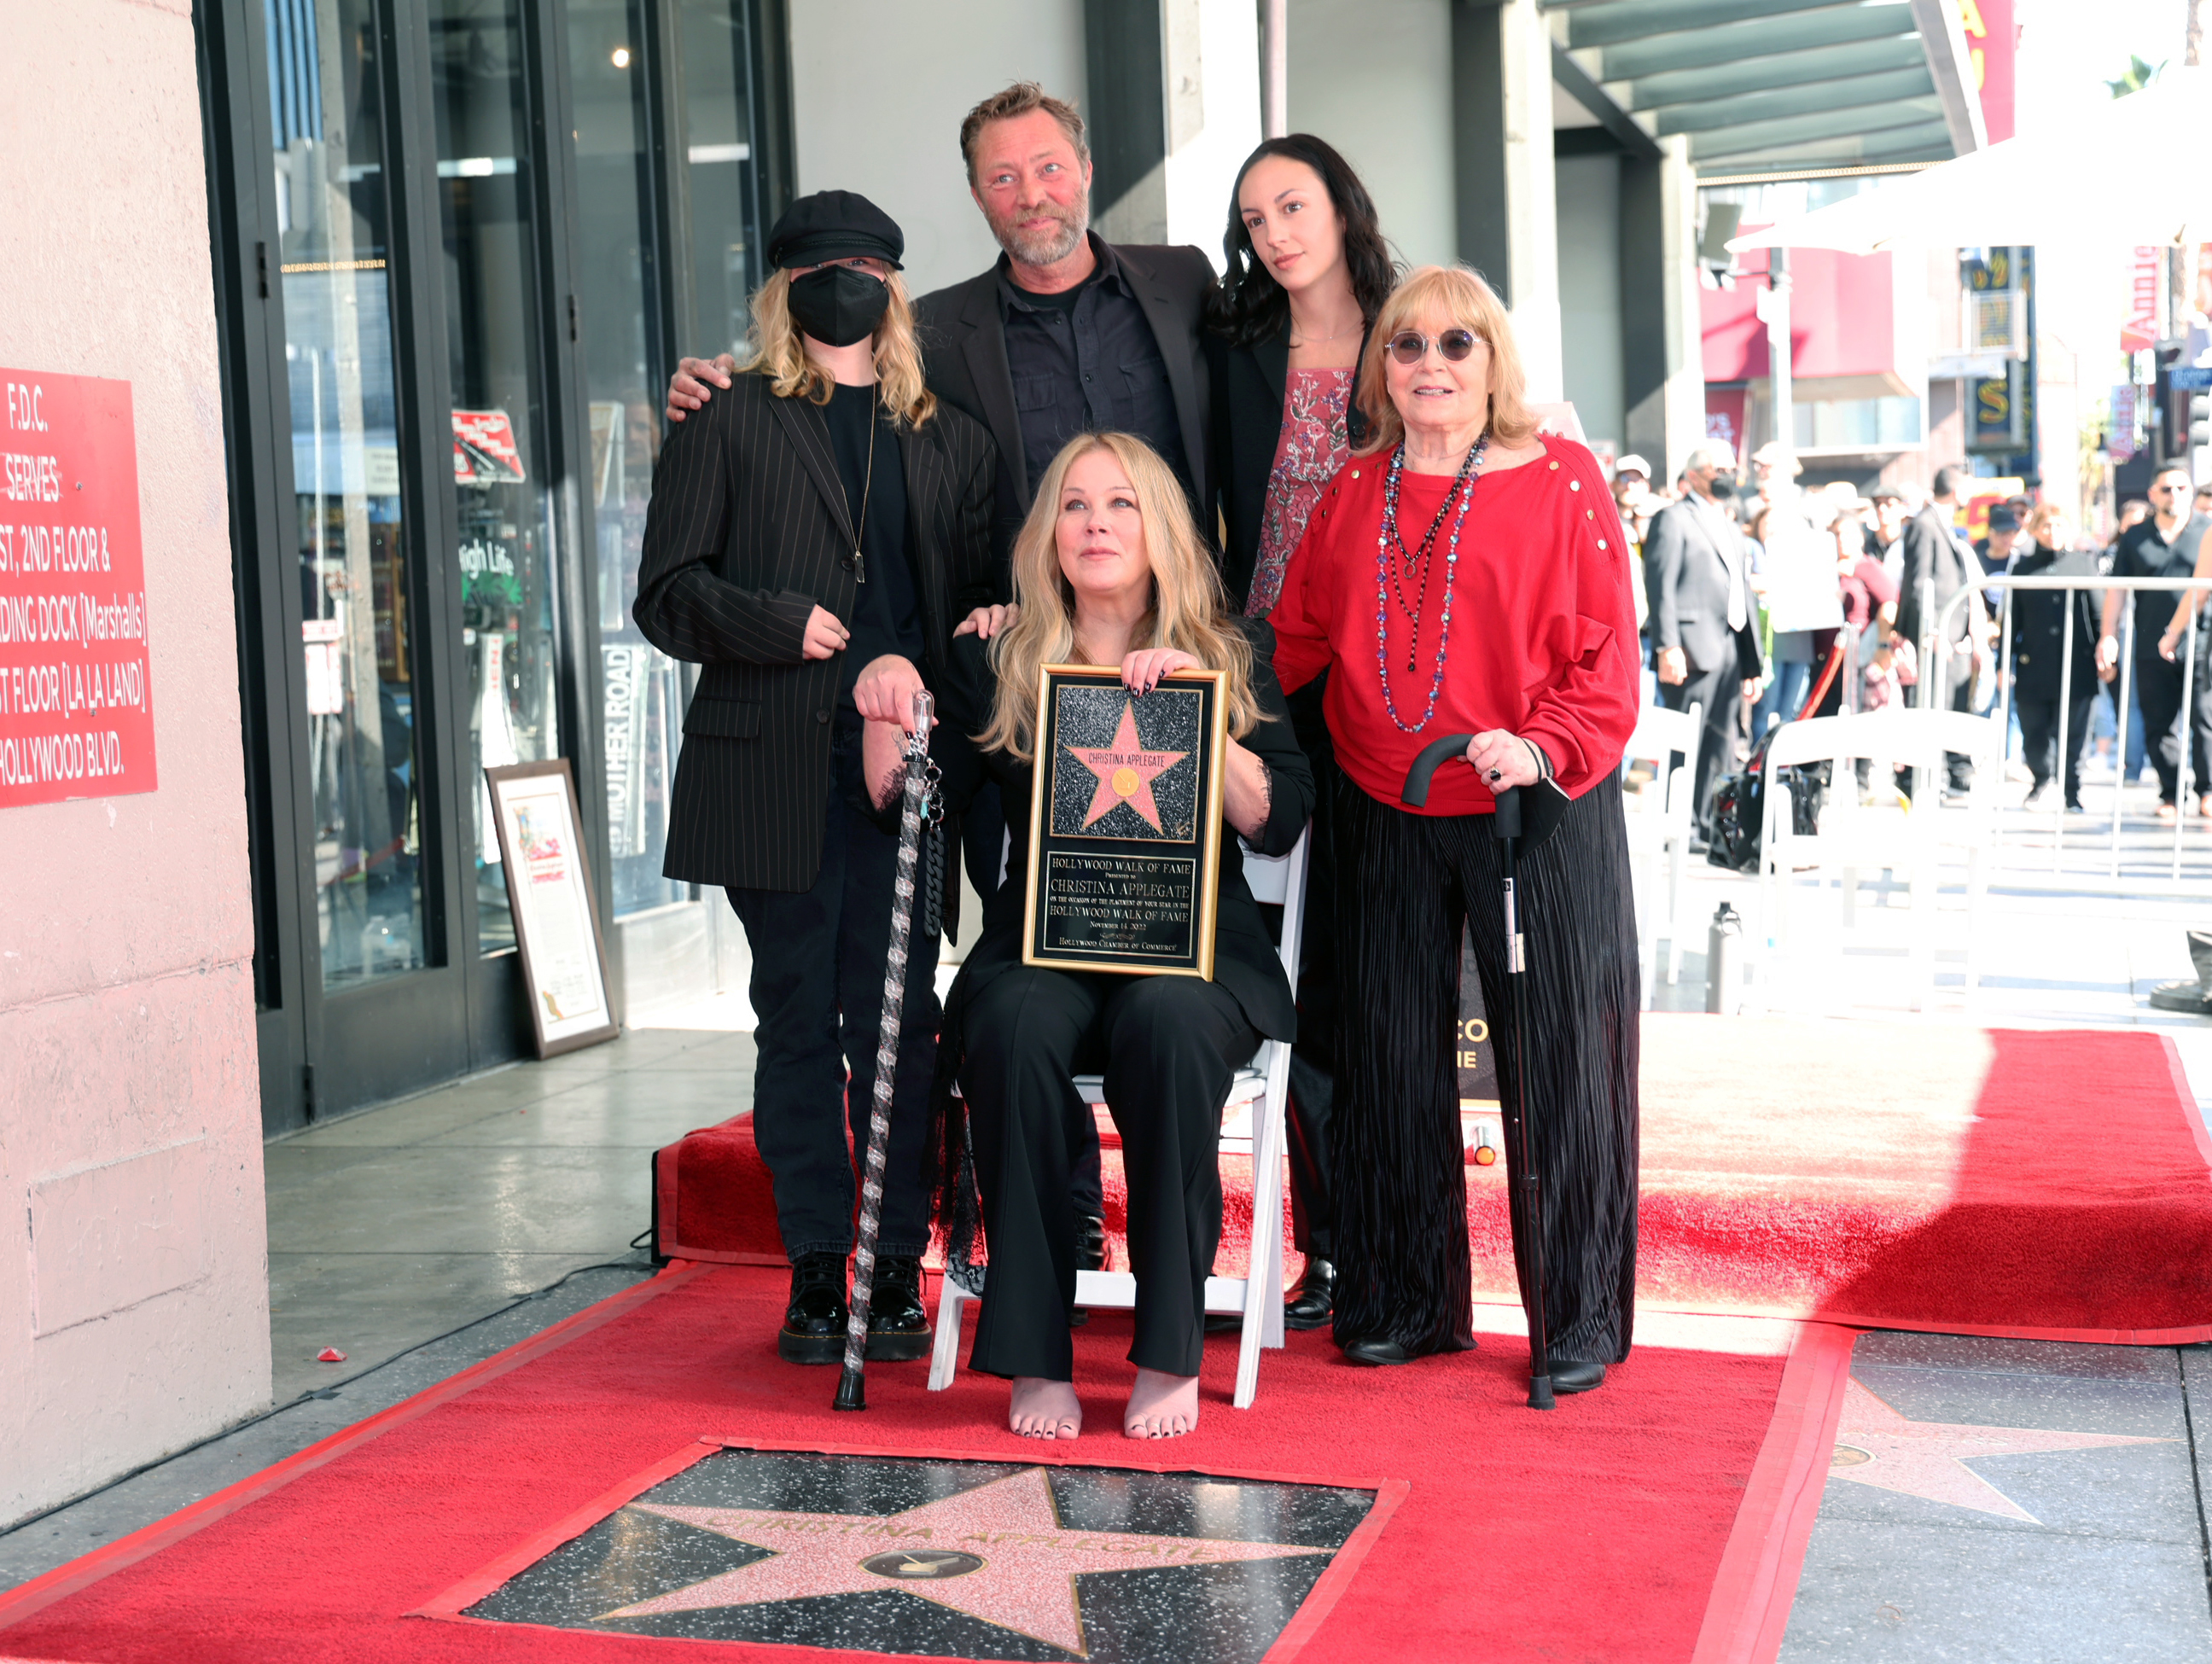 Sadie Grace LeNoble, Martyn LeNoble, Christina Applegate, guest, and Nancy Priddy pose with Christina Applegate's star during the Hollywood Walk of Fame Ceremony in Los Angeles, California, on November 14, 2022. | Source: Getty Images